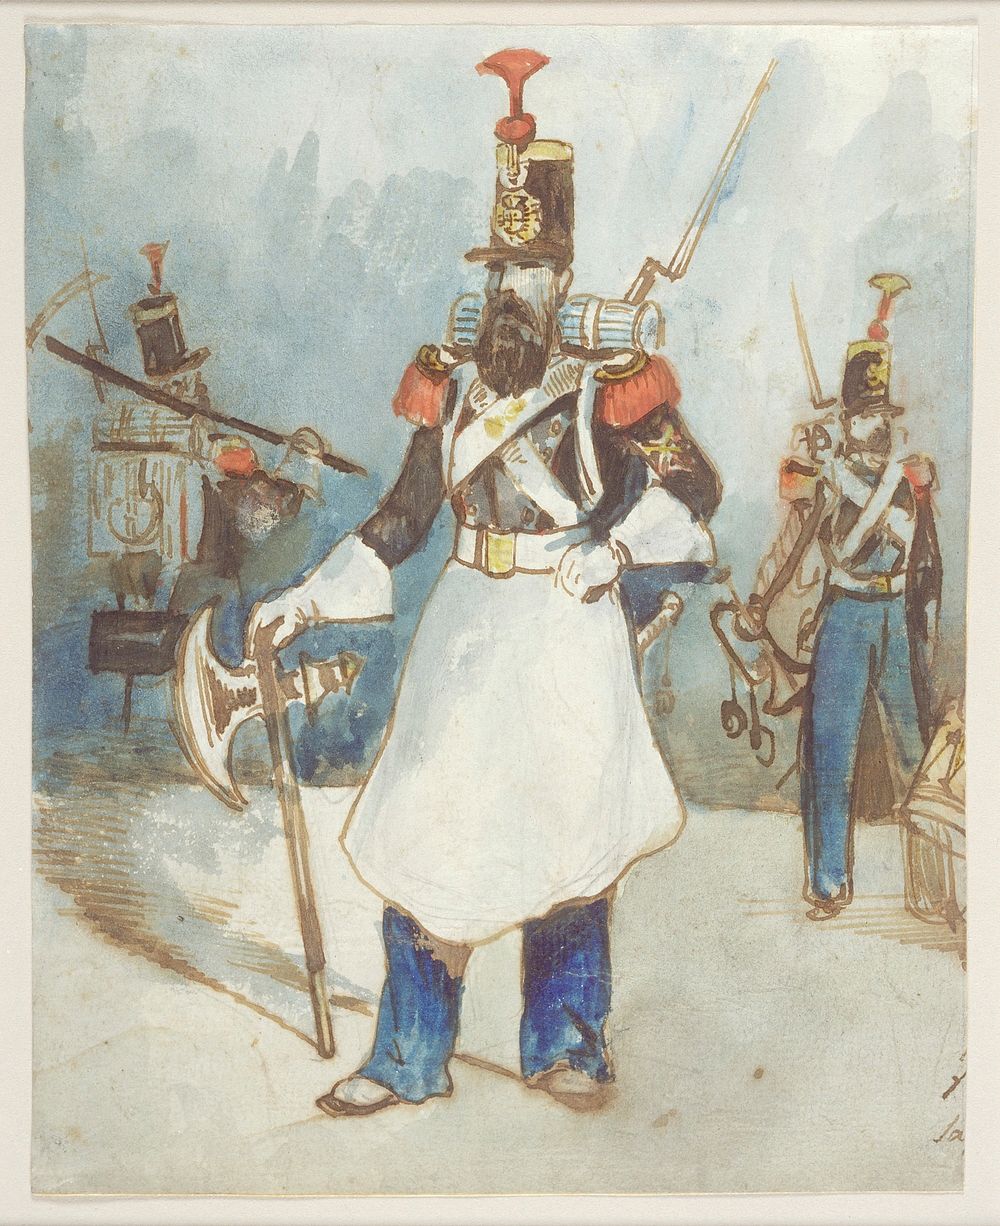 French Sapper. Original from the Minneapolis Institute of Art.